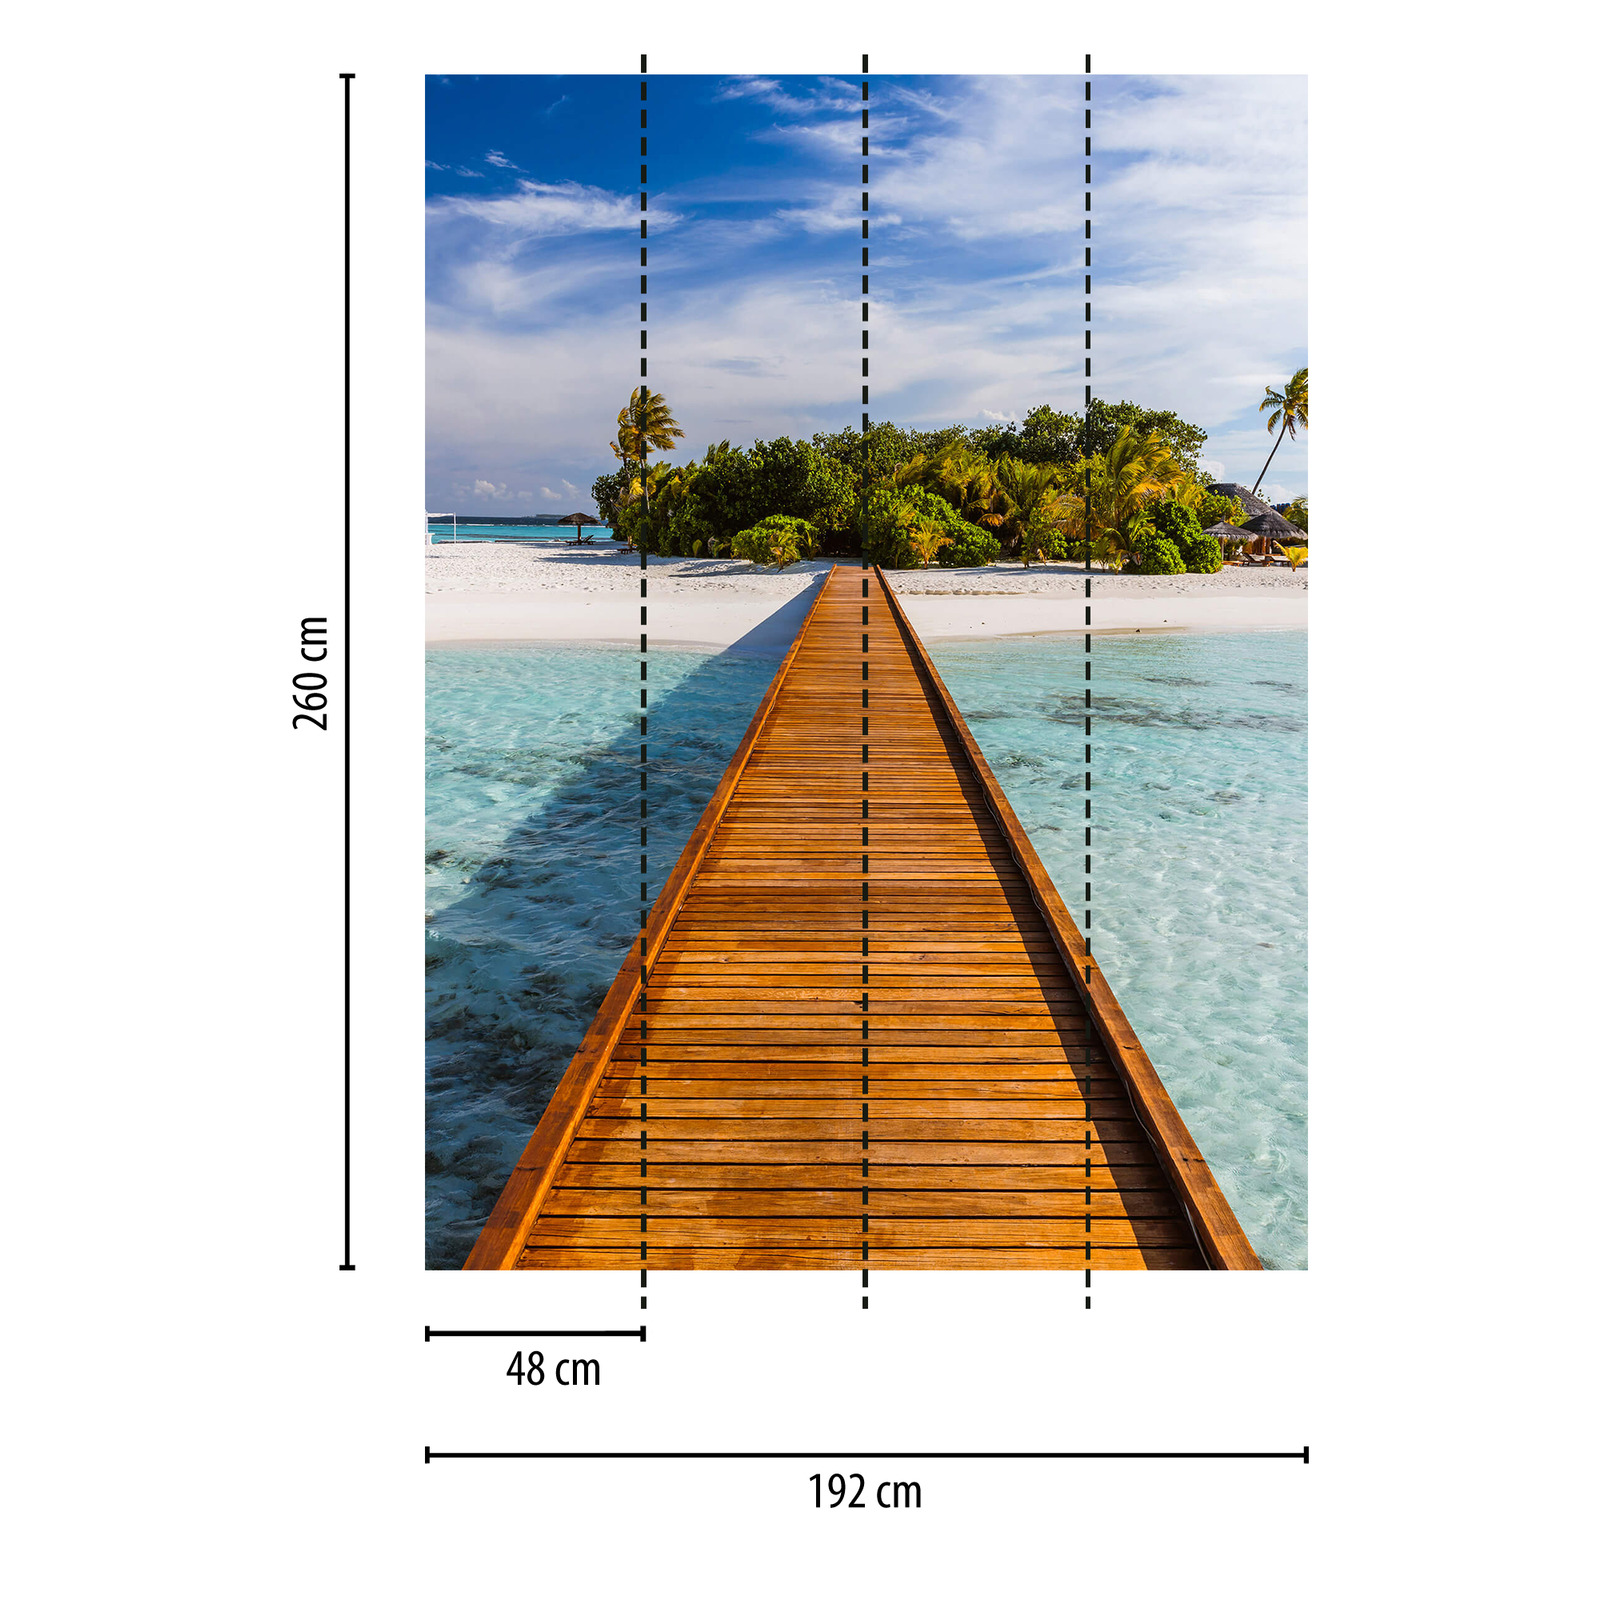             South Seas mural jetty and island, portrait format
        